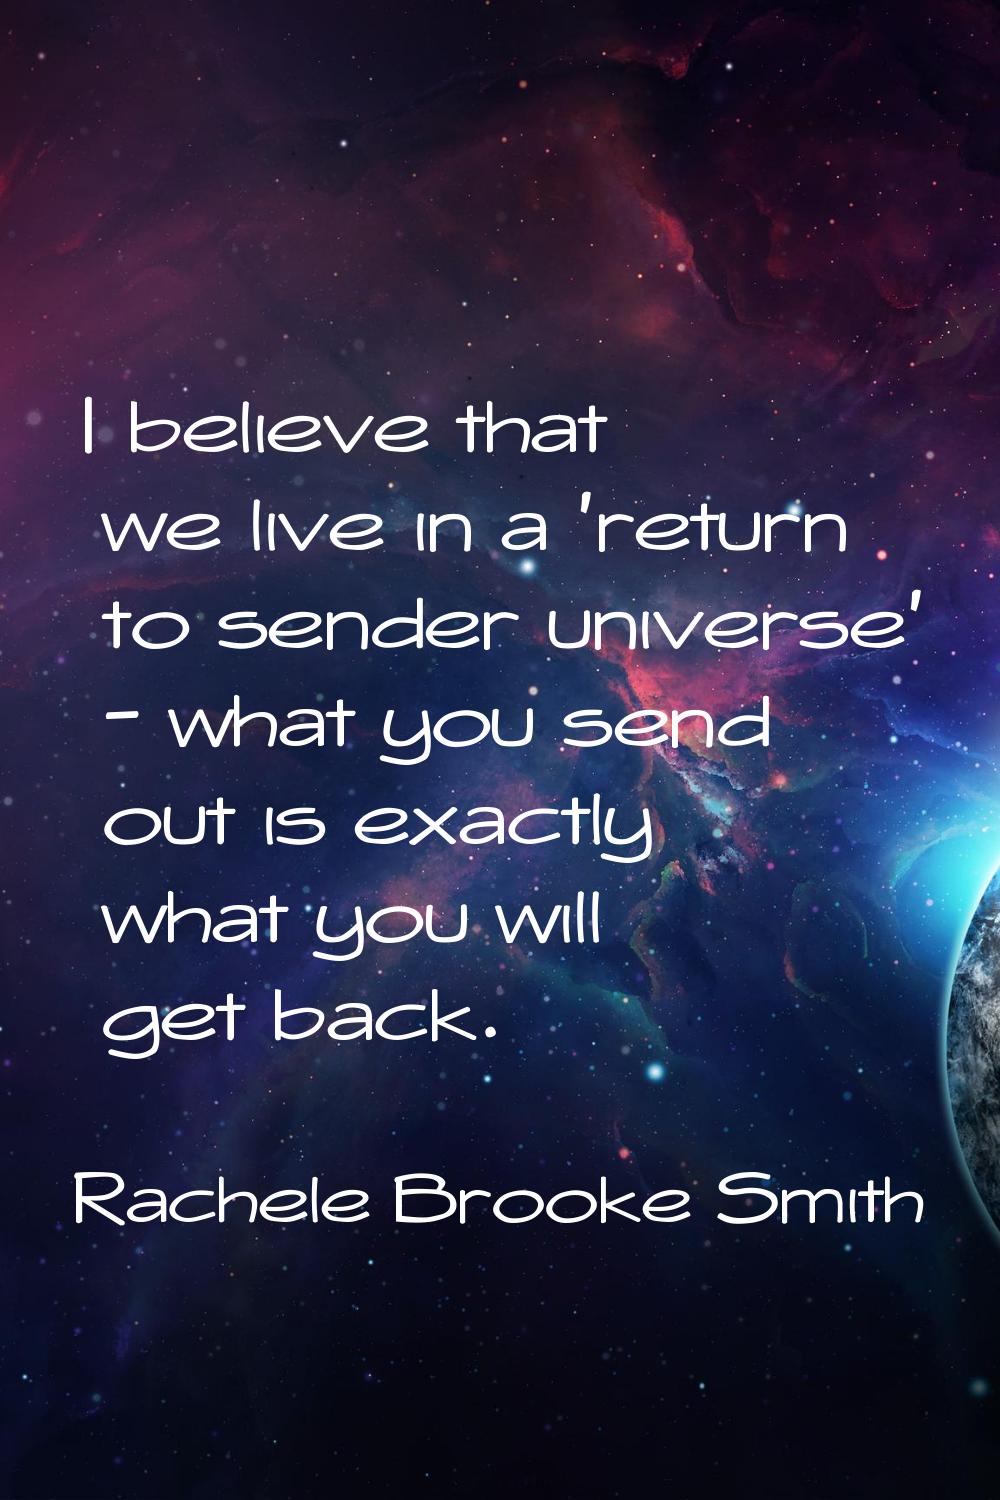 I believe that we live in a 'return to sender universe' - what you send out is exactly what you wil